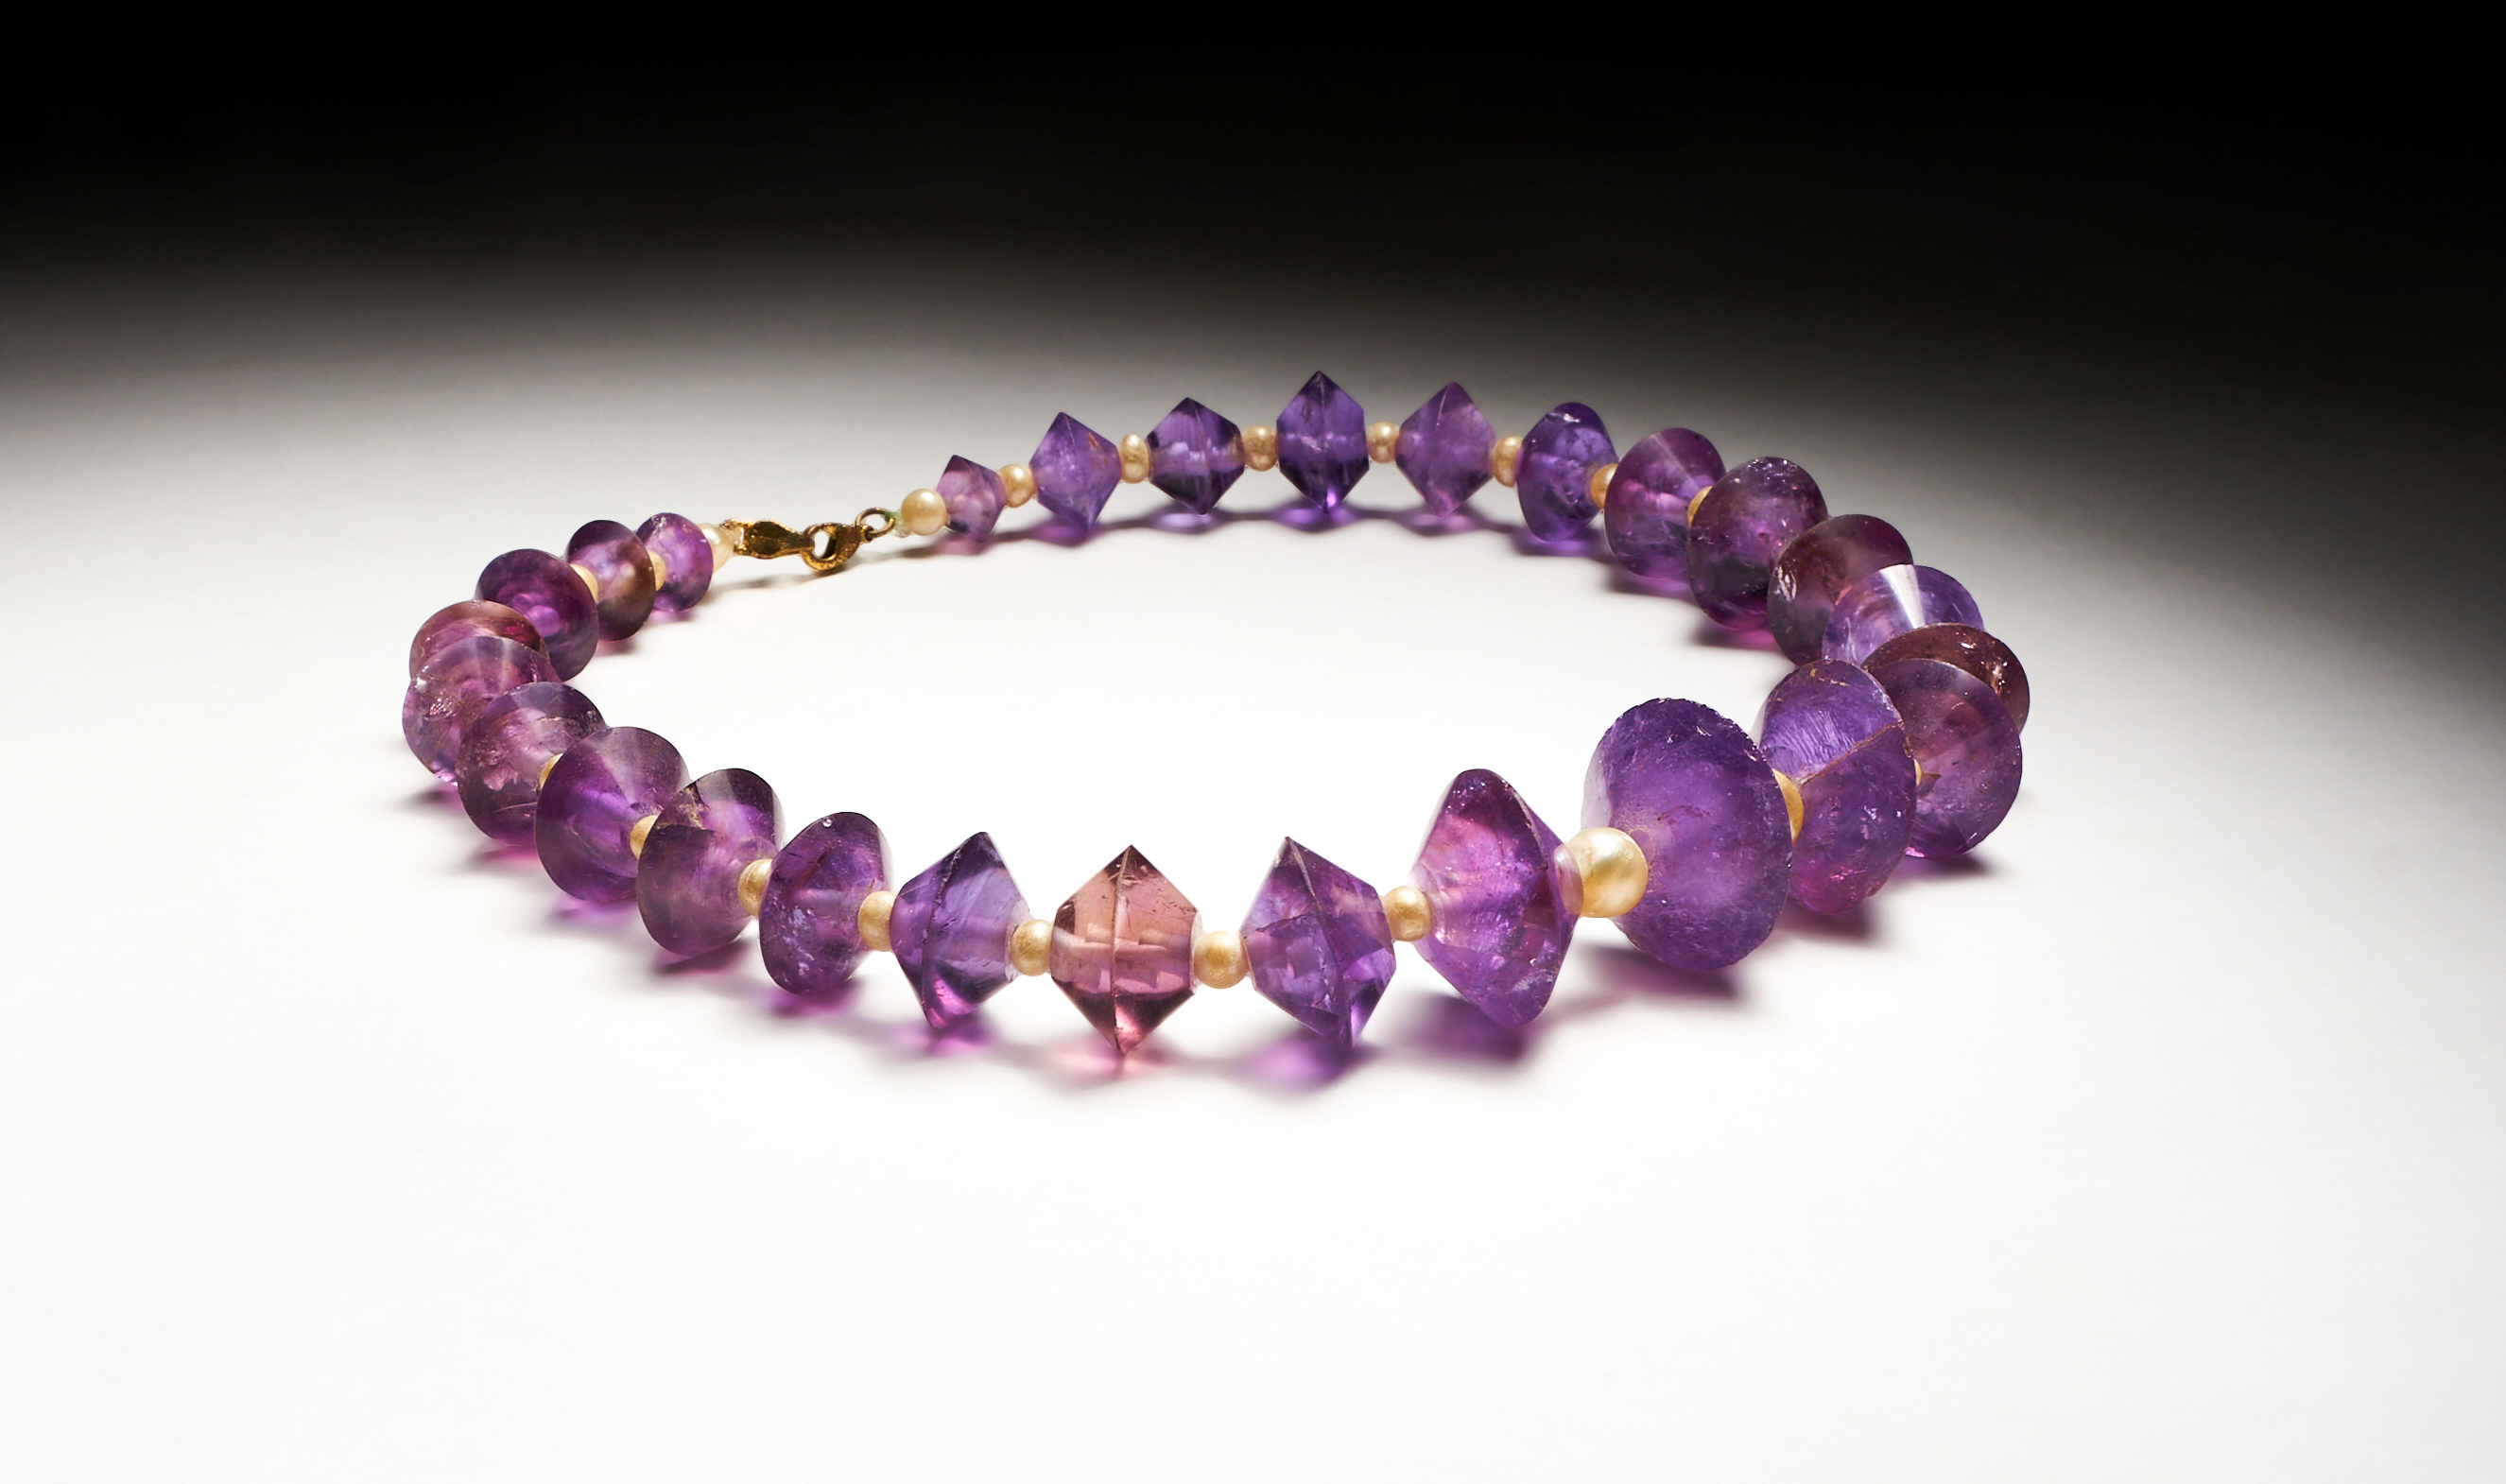 A ROMAN GOLD, AMETHYST & PEARL BEAD NECKLACE CIRCA 1ST CENTURY B.C.-1ST CENTURY A.D. - Image 5 of 5